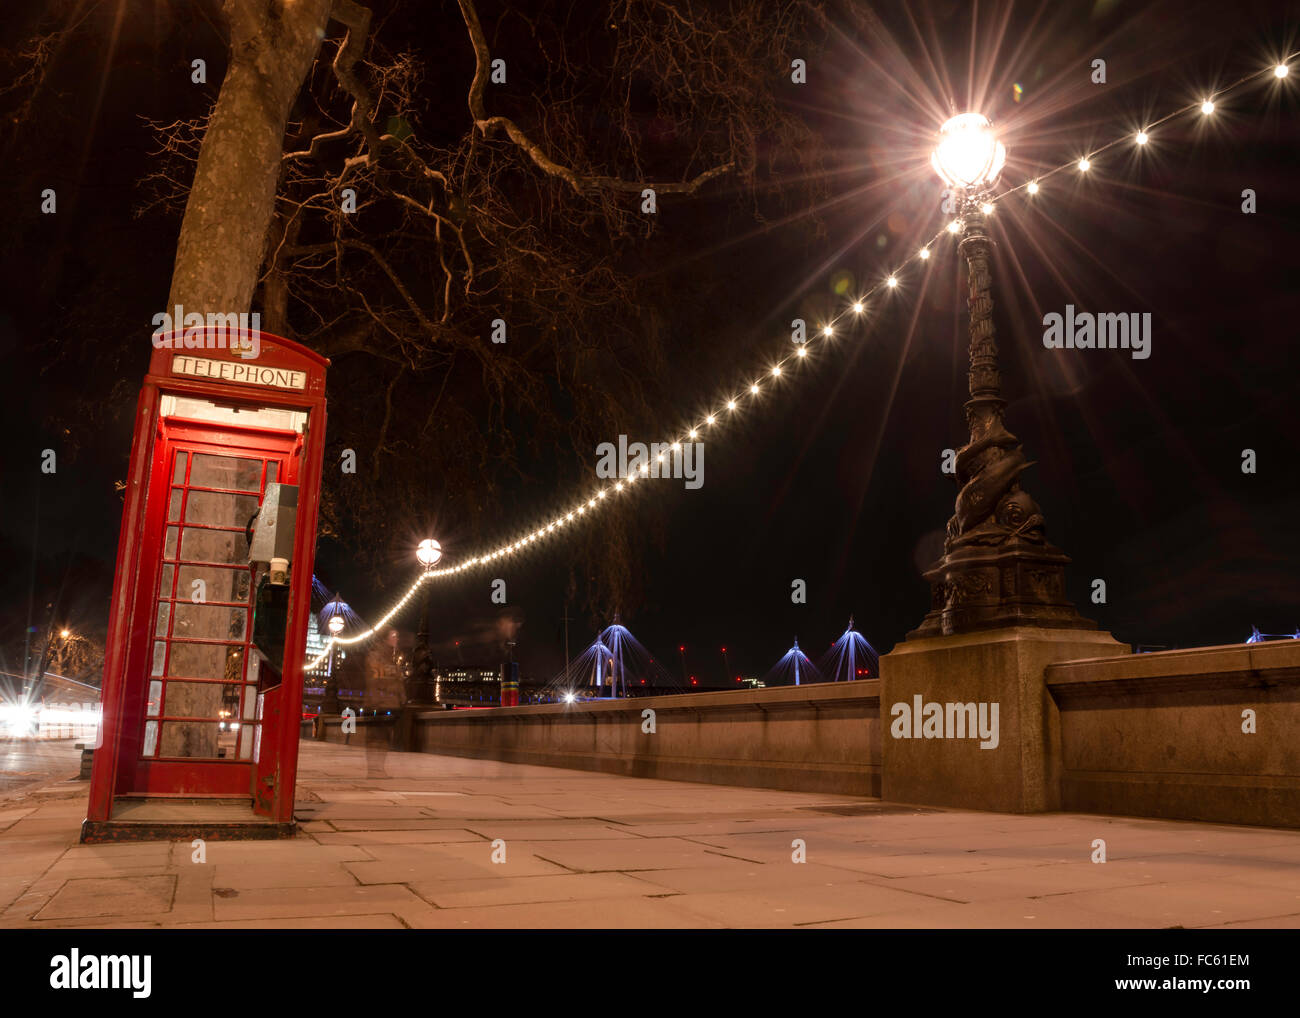 Traditional English Red Phone Box in London Stock Photo